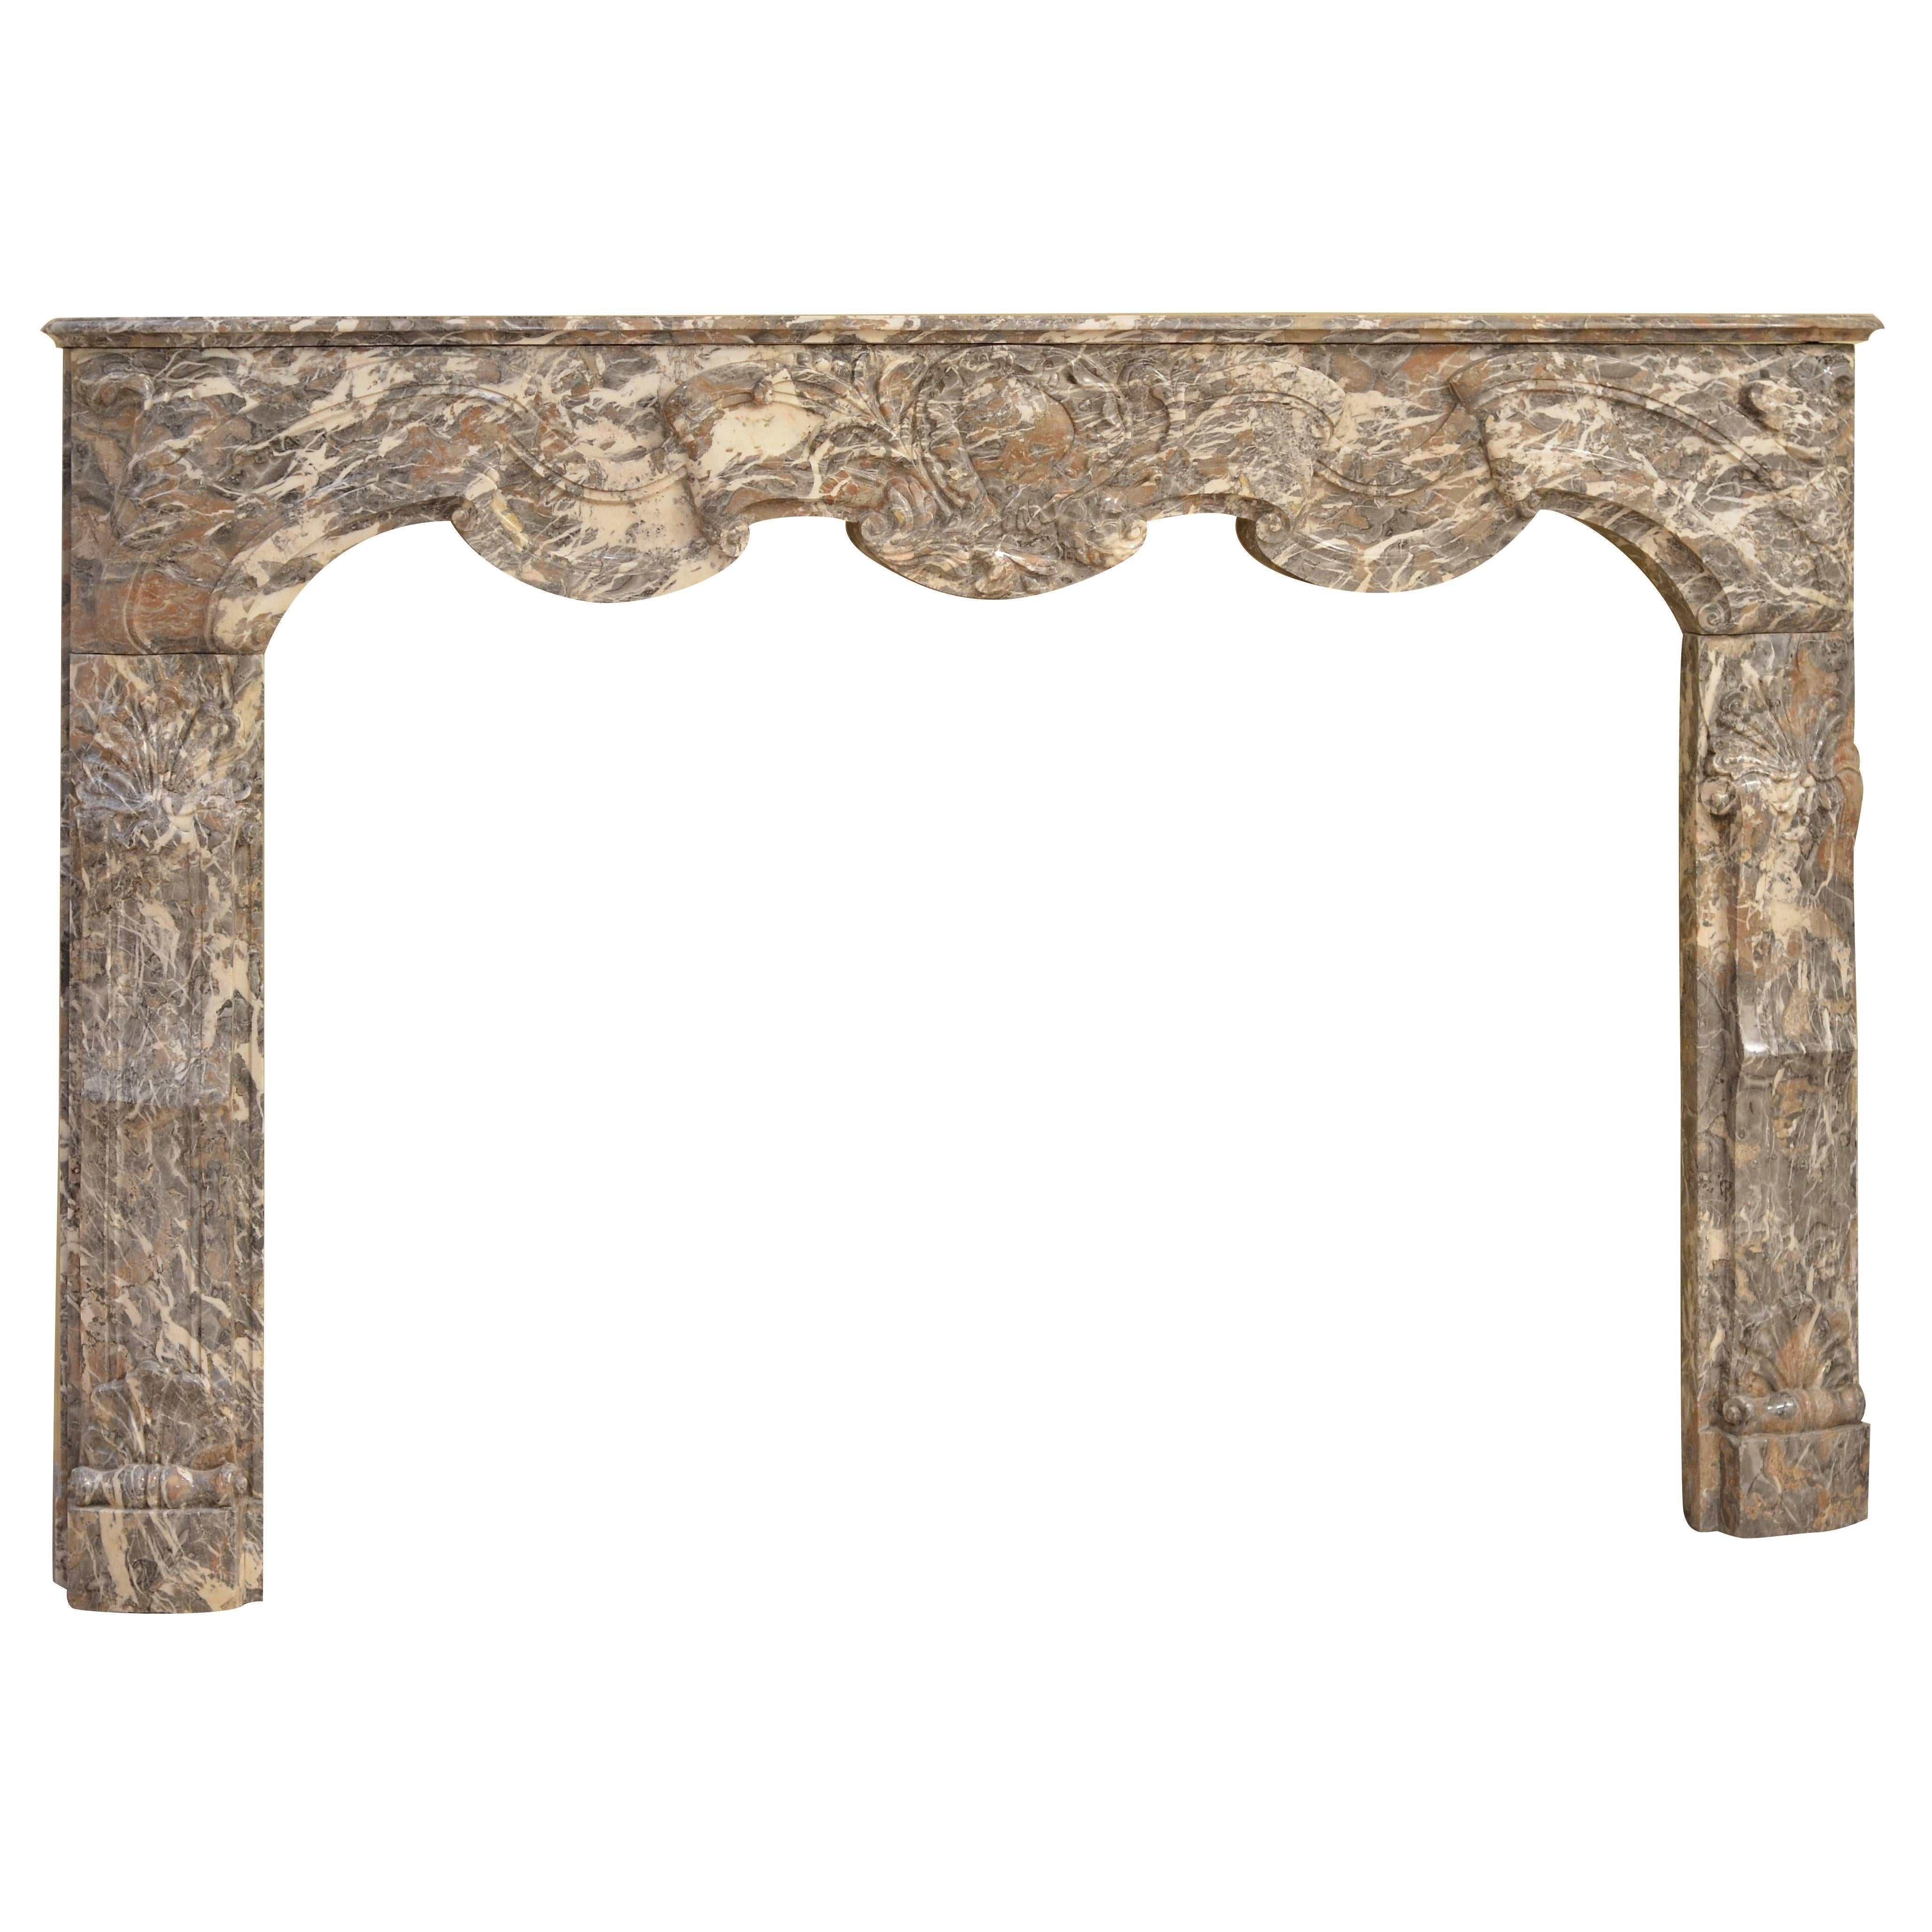 Antique Fireplace Mantel in Rouge Royal Marble